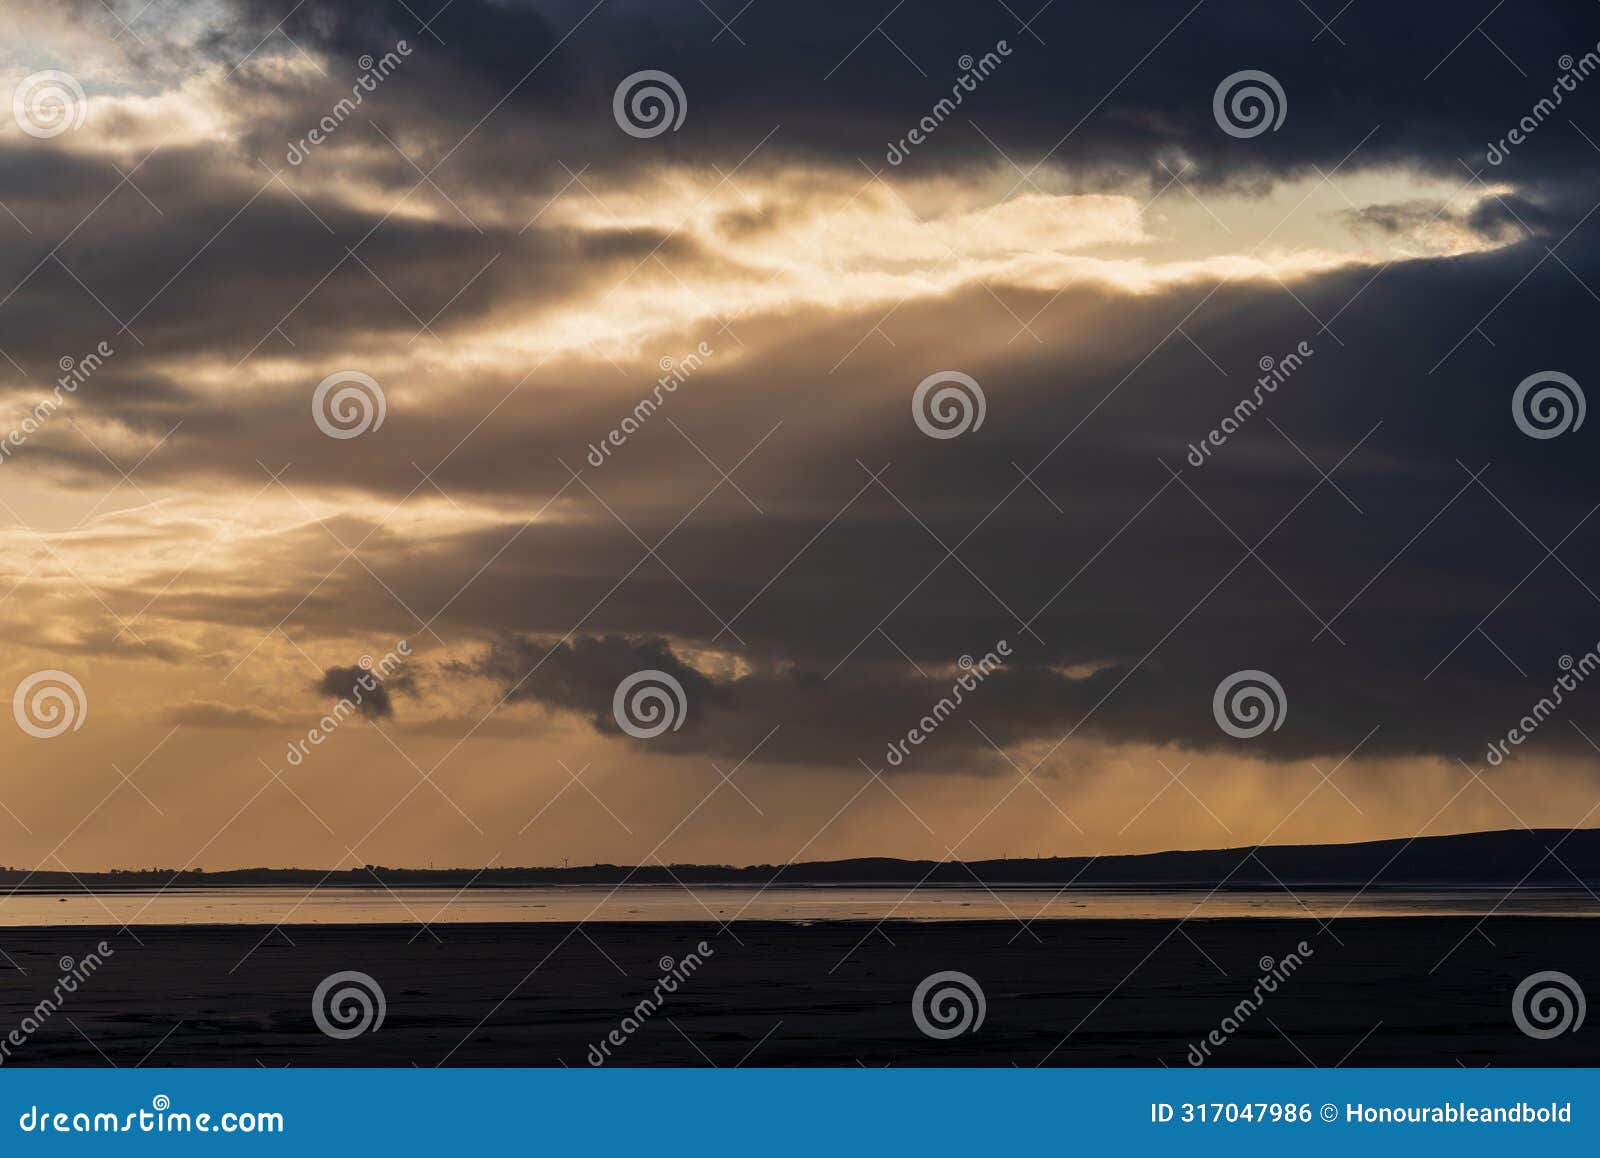 beautiful moody storm skies over ocean landscape with distant heavy rainfall